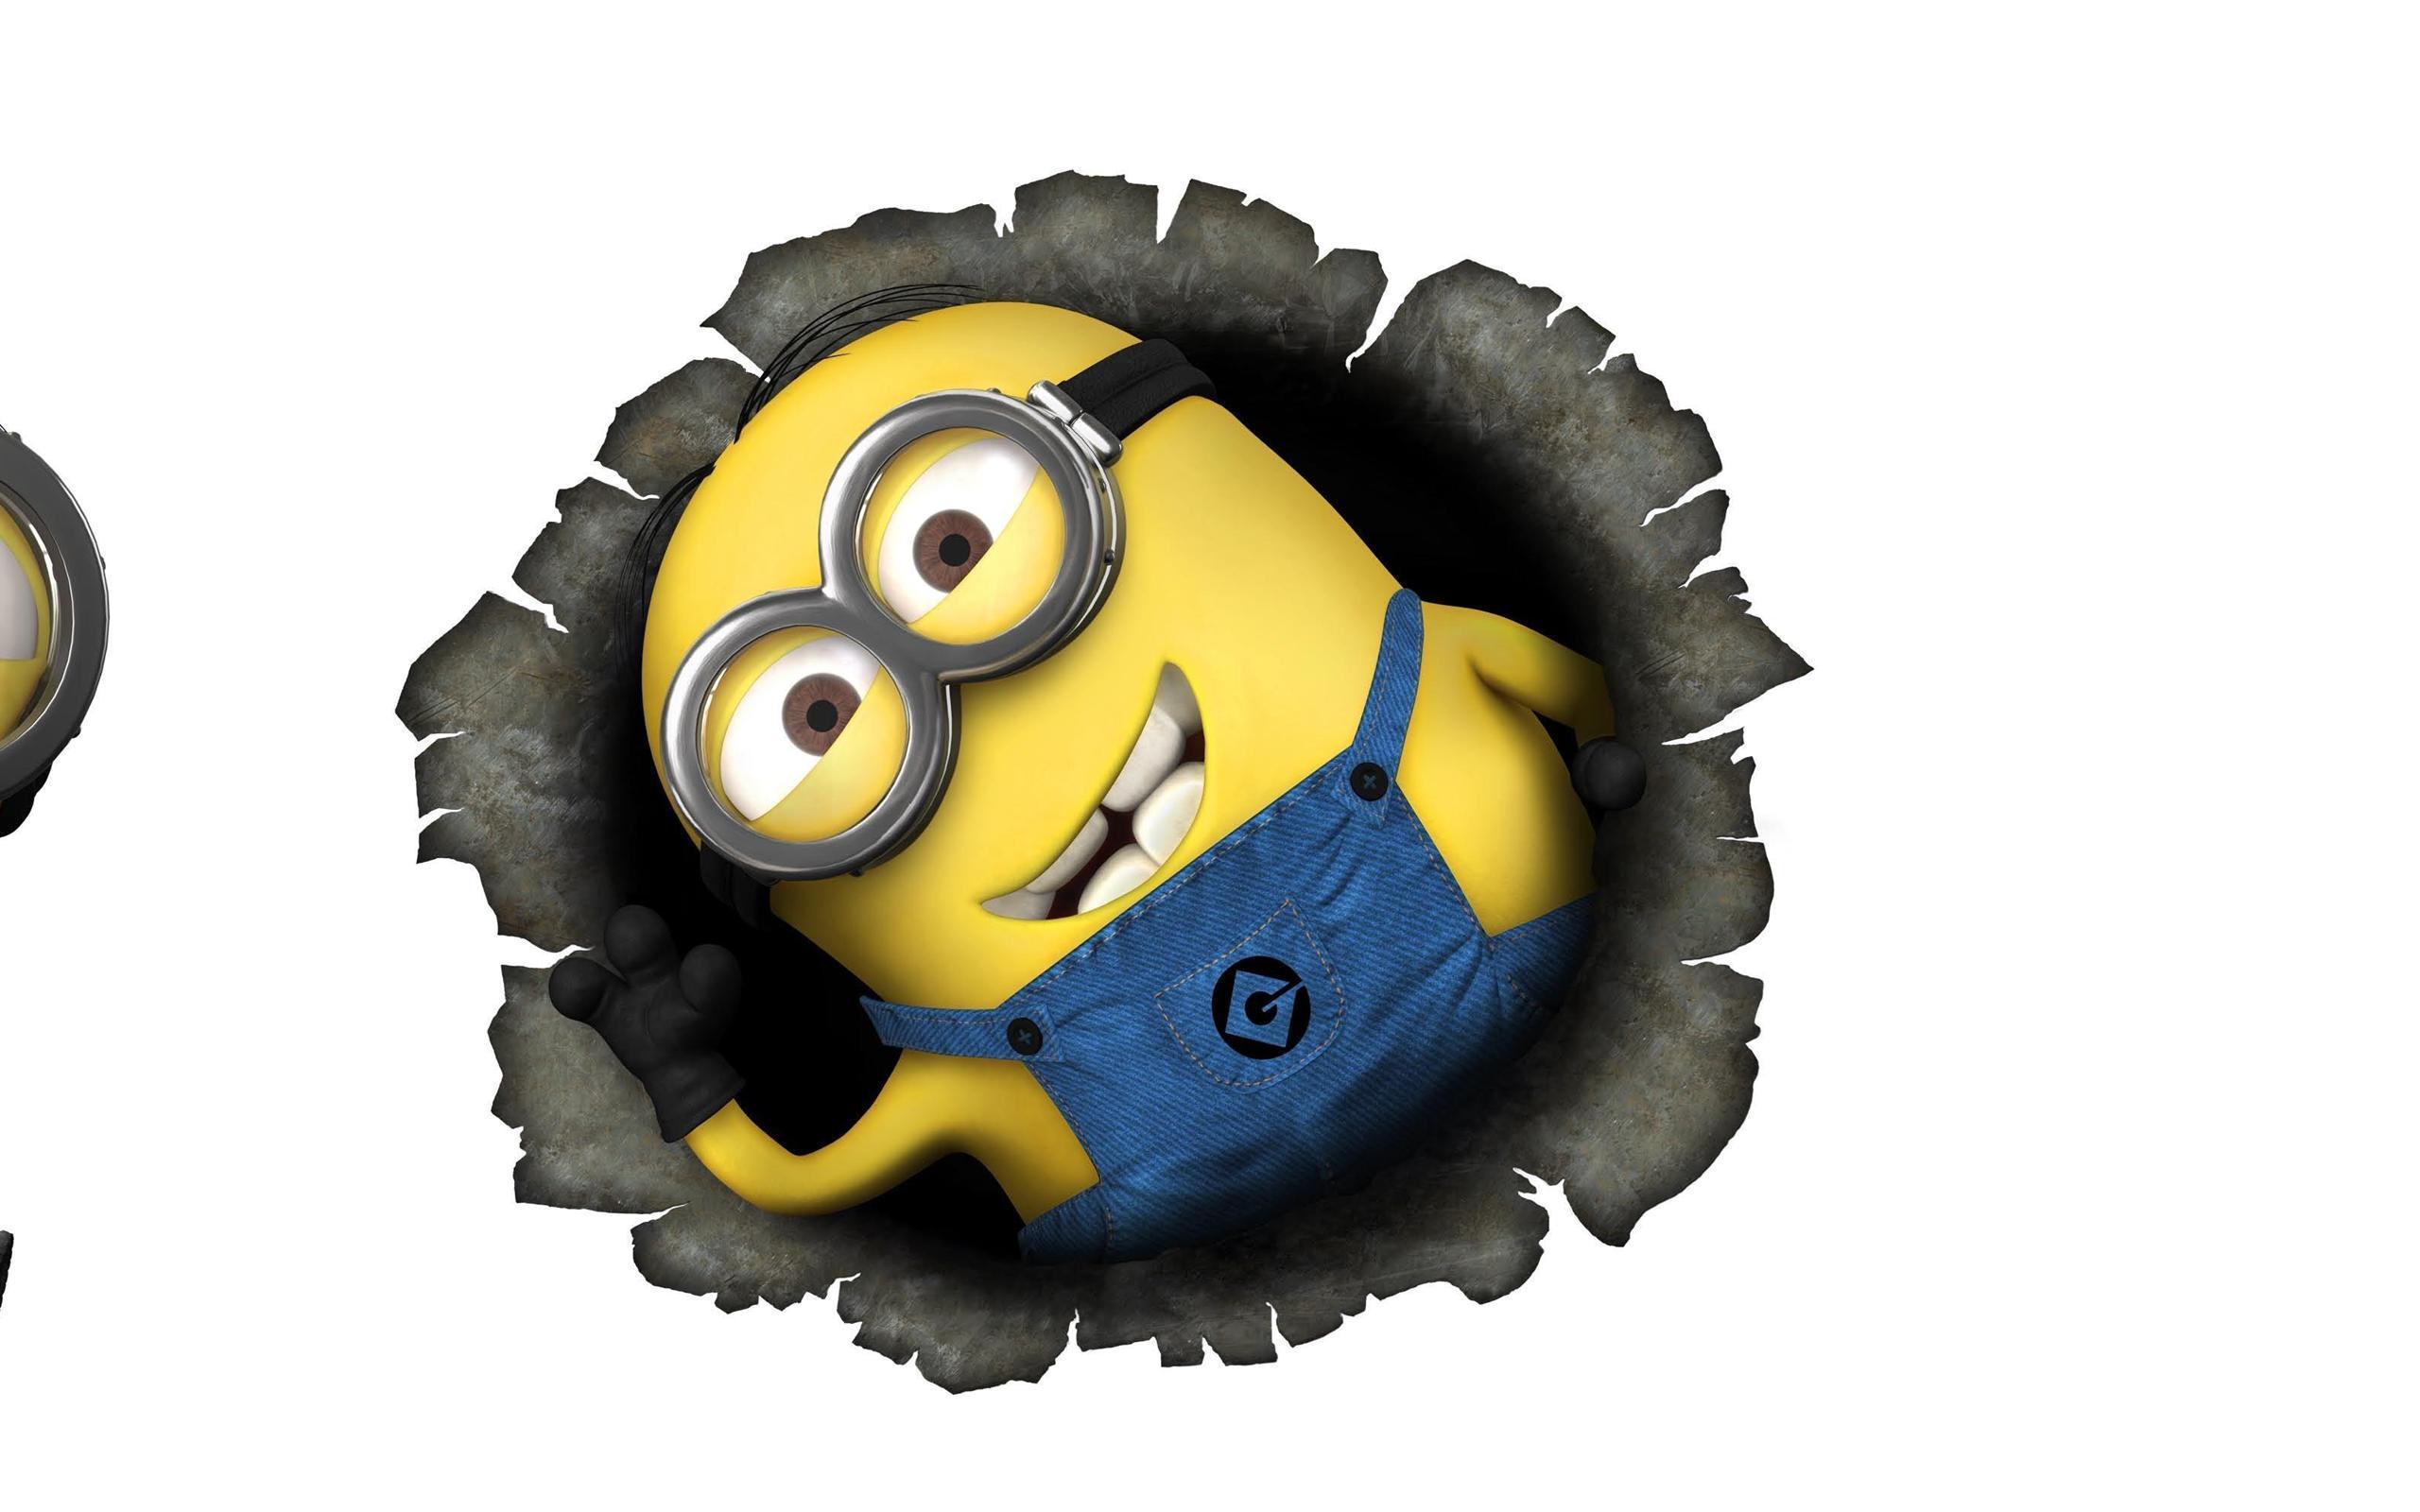 Despicable Me Minions Wallpaper For Free